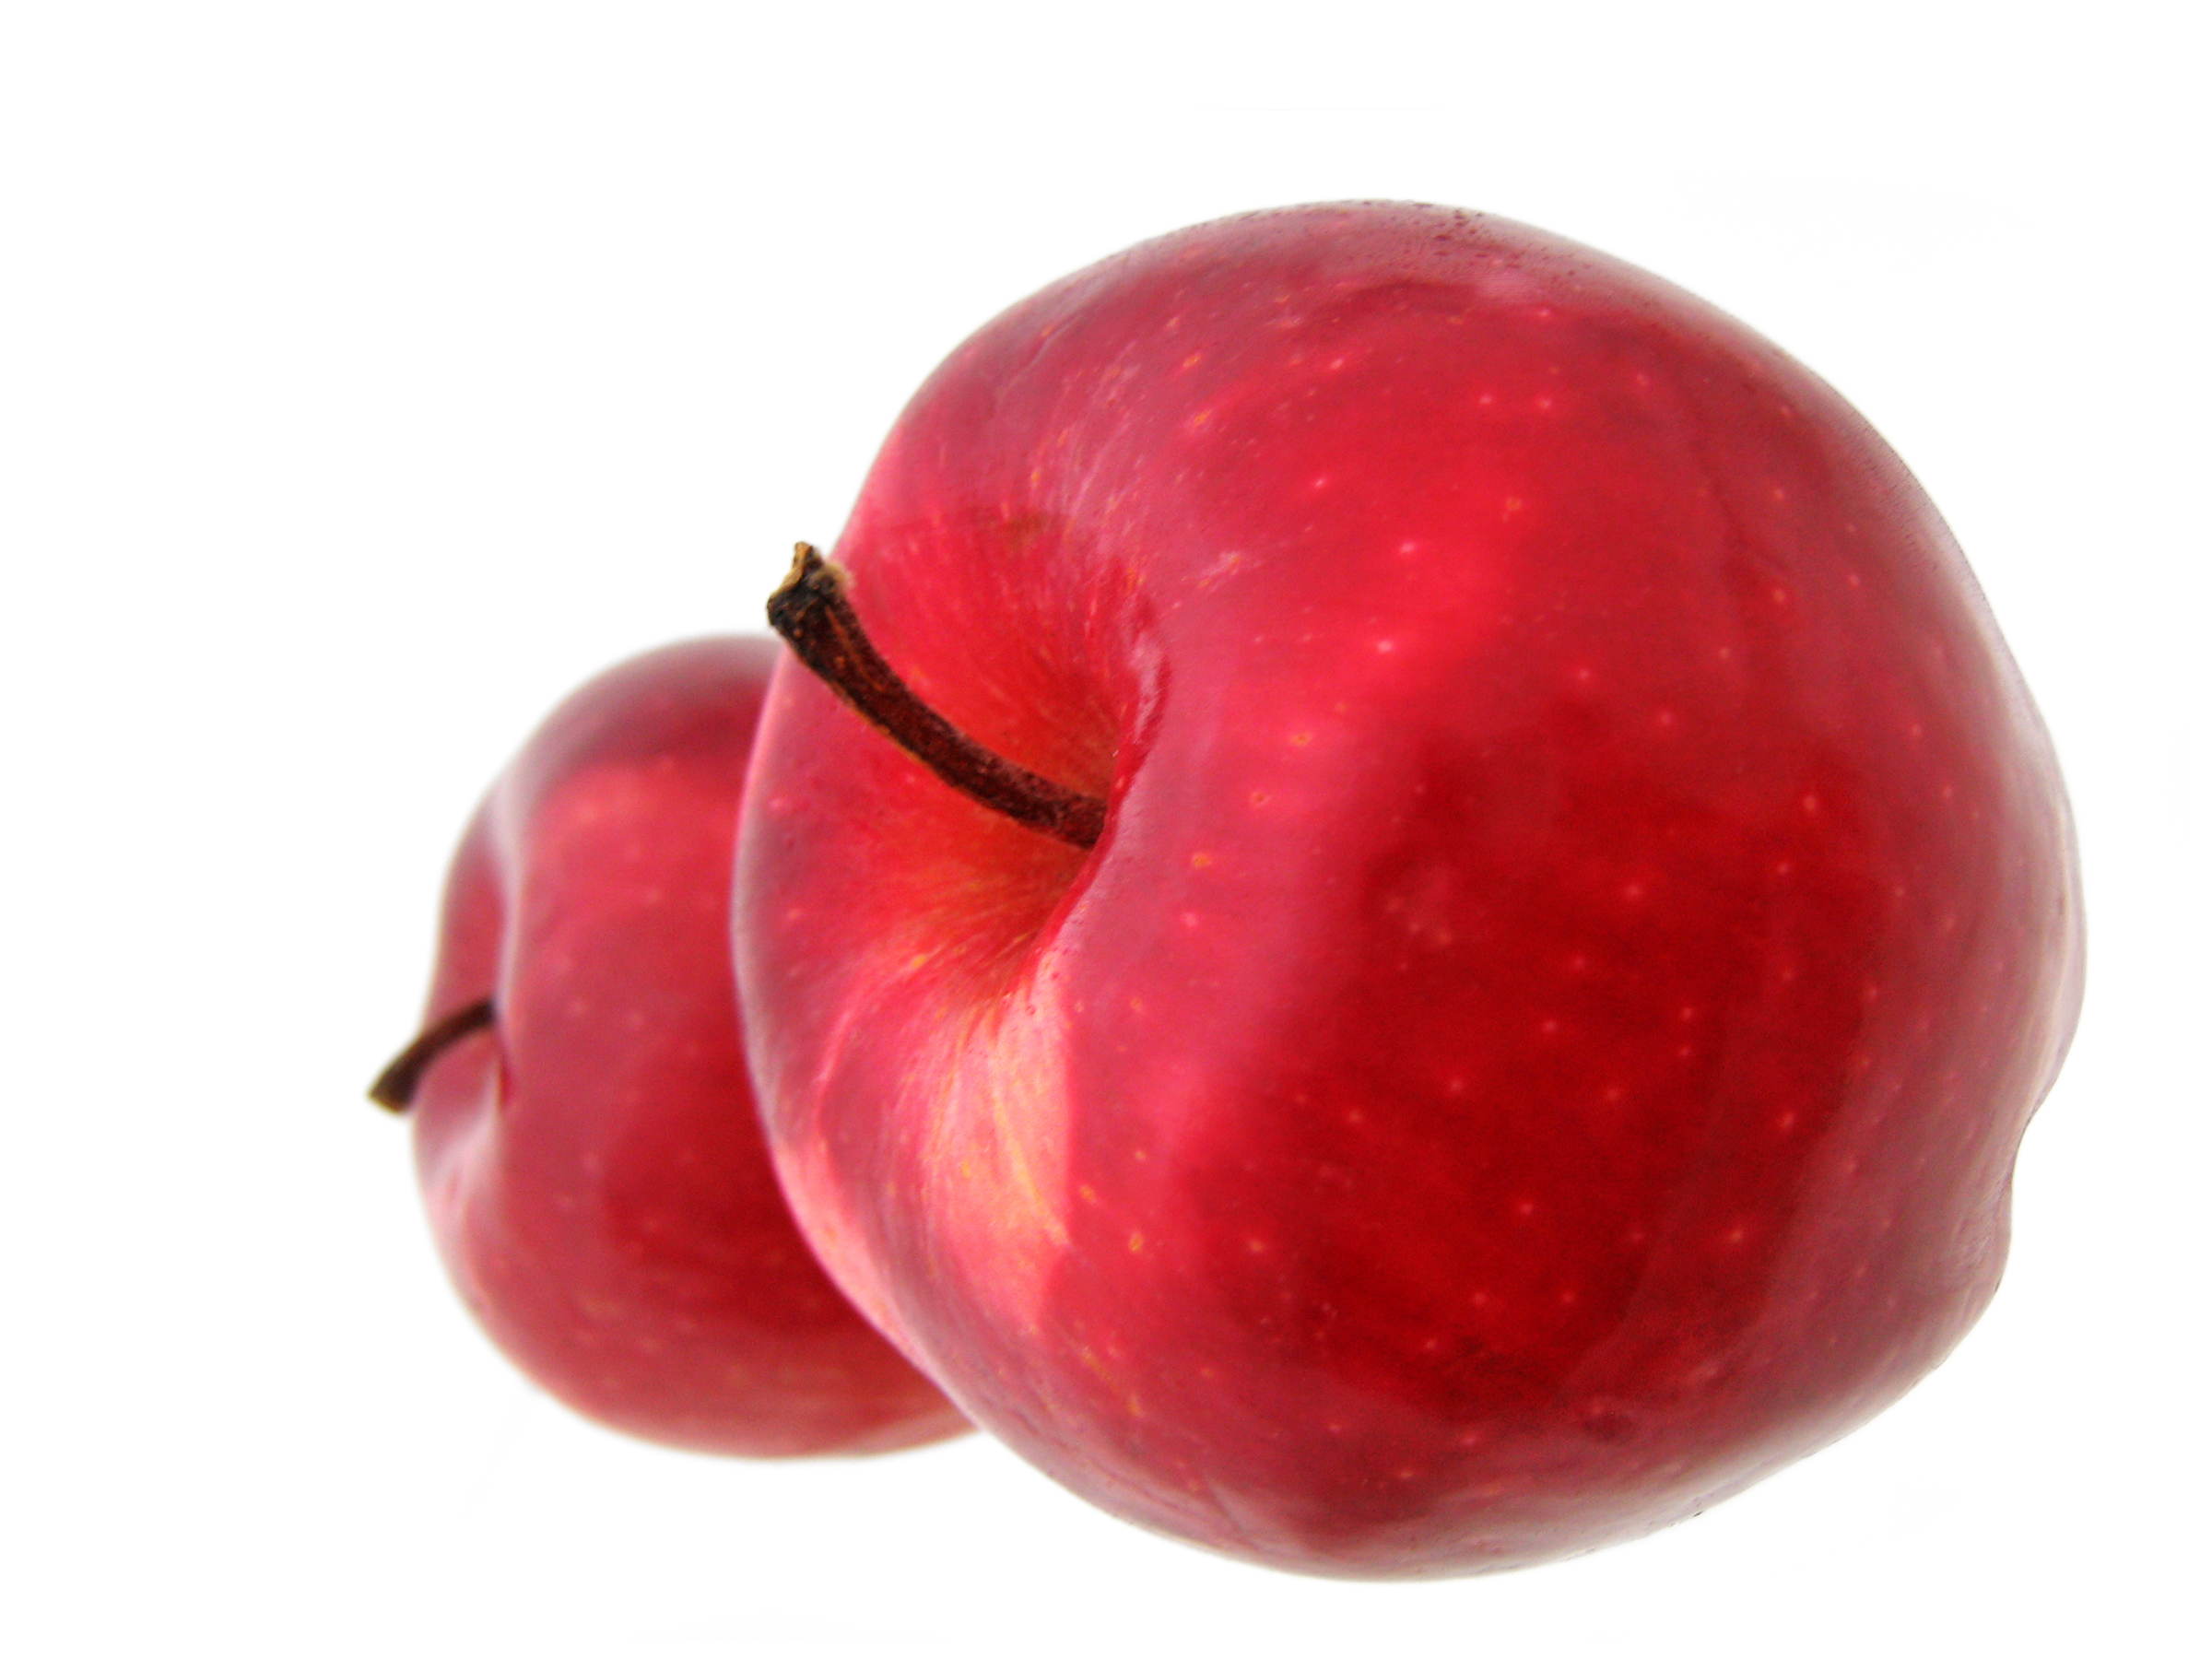 Red apples photo